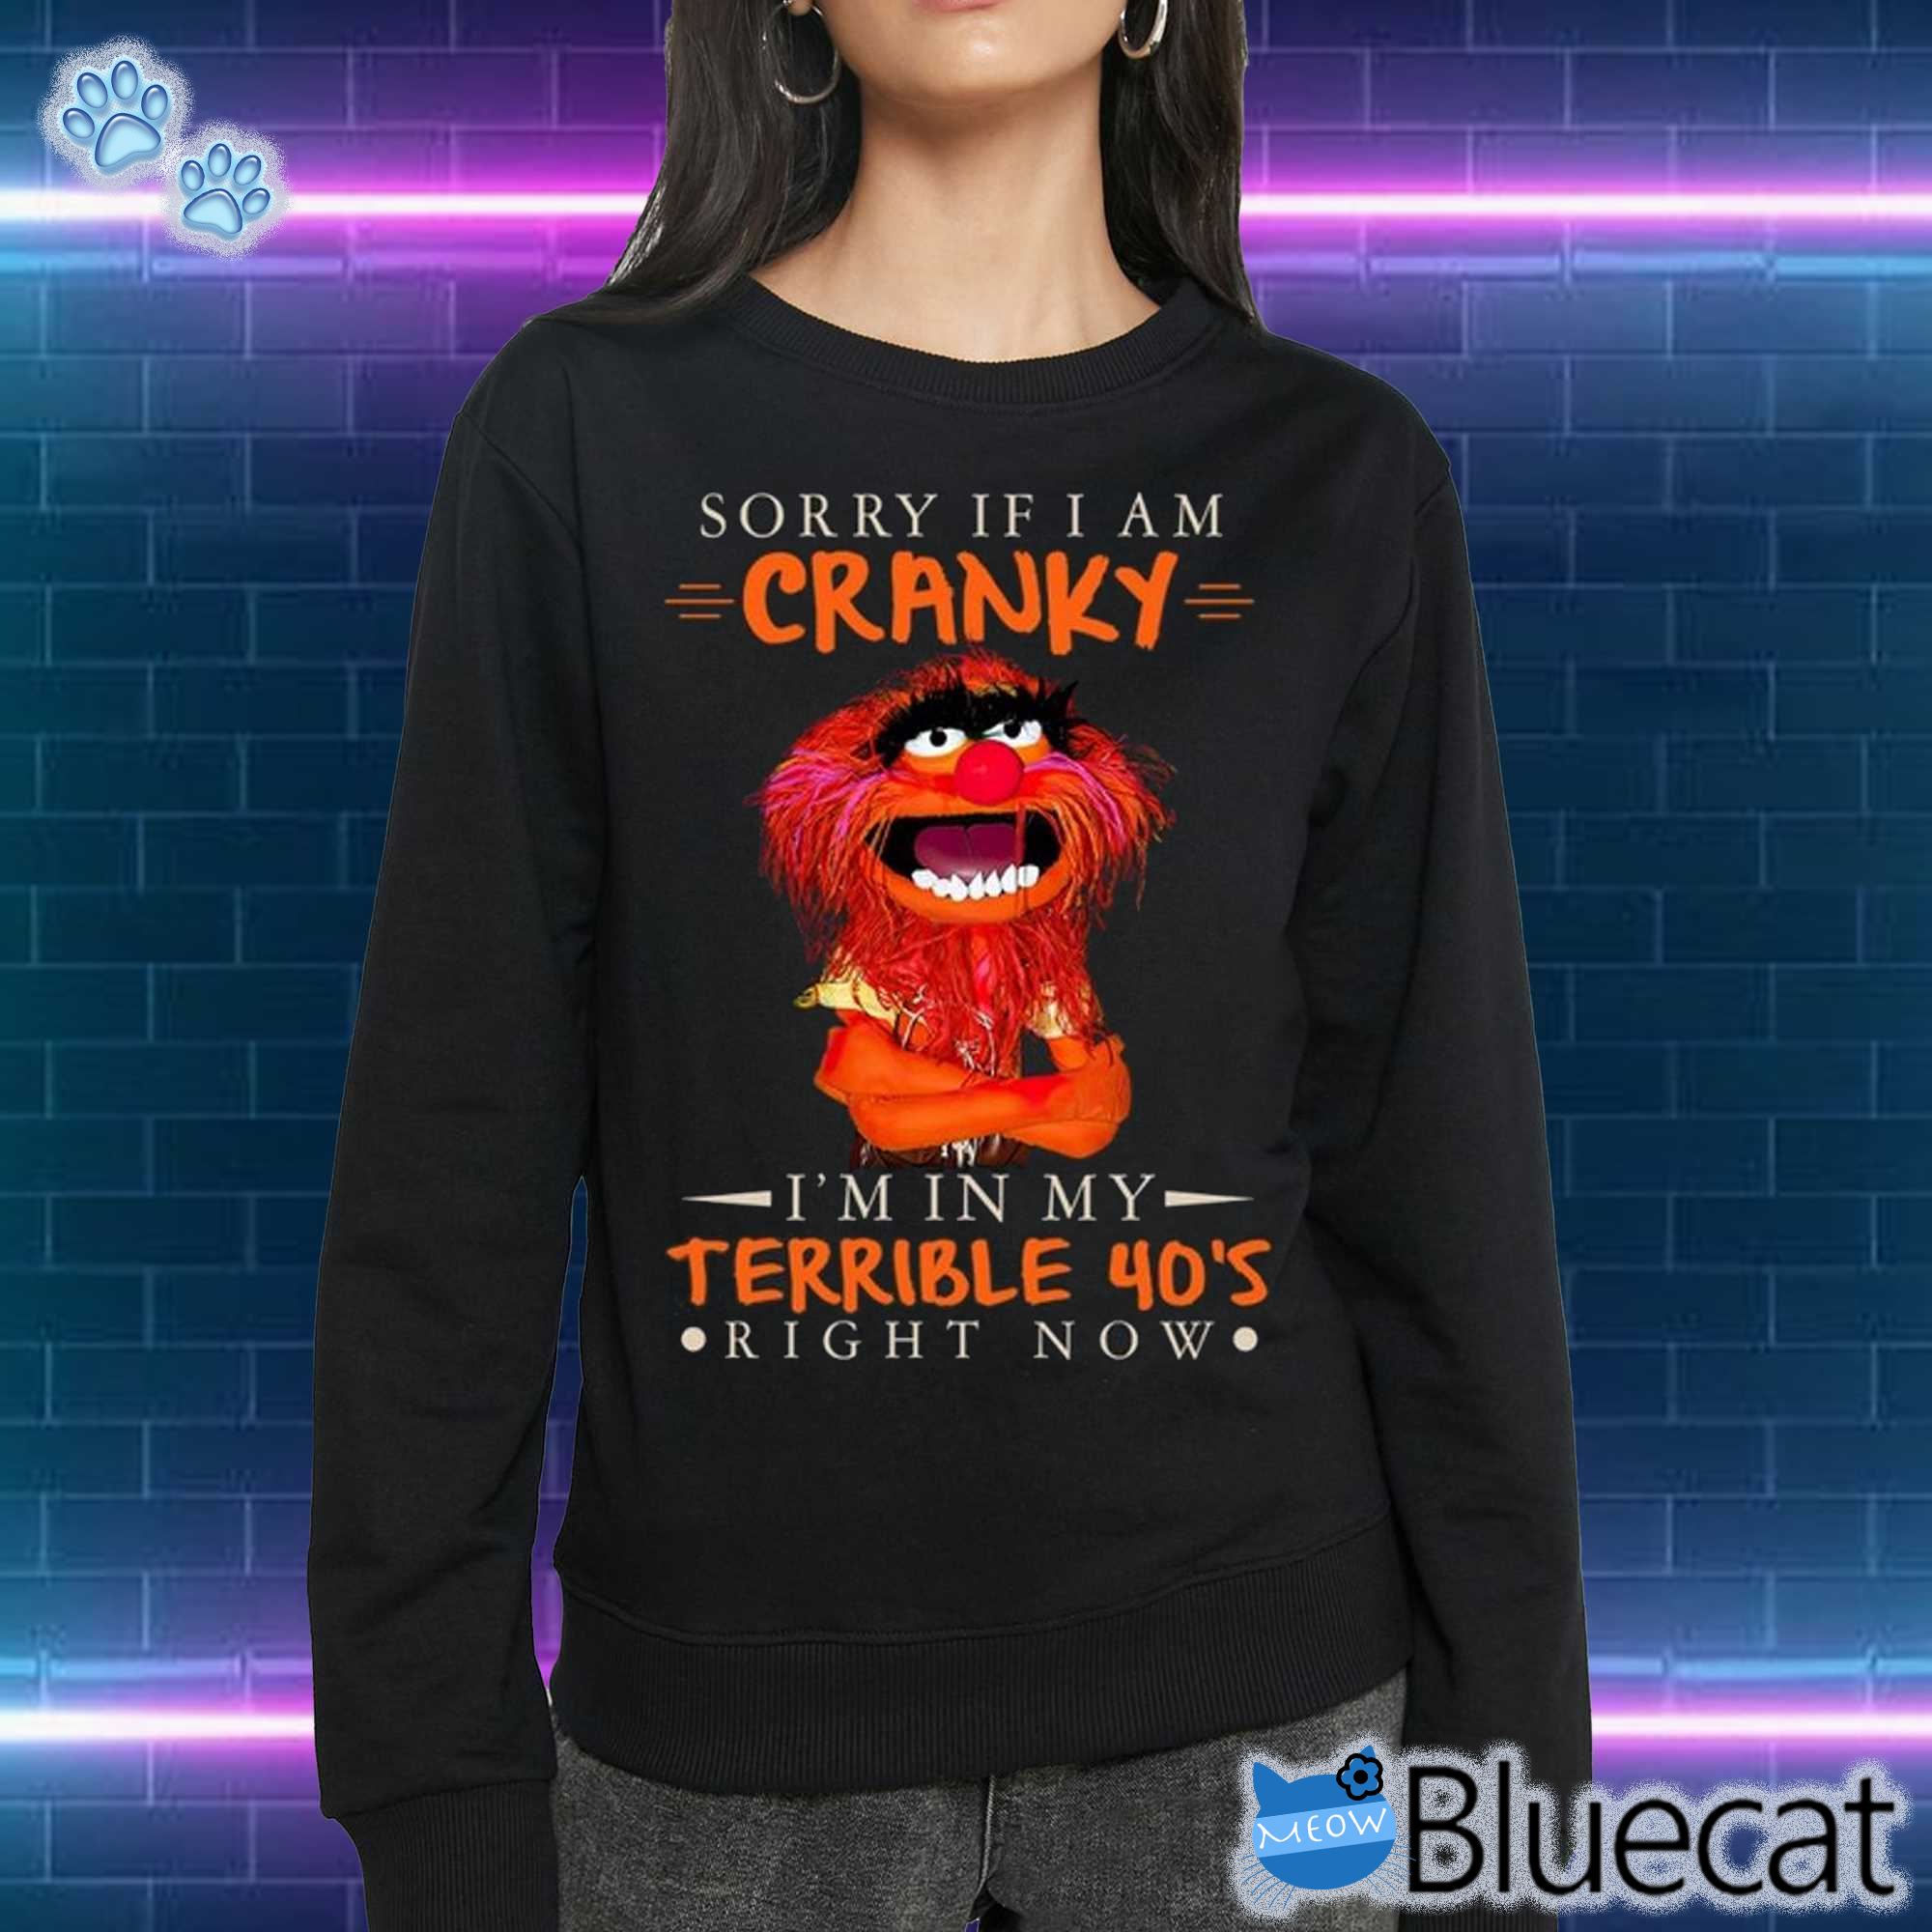 Sorry If I Am Cranky Im In My Terrible 40s Right Now T-shirt Sweatshirt 